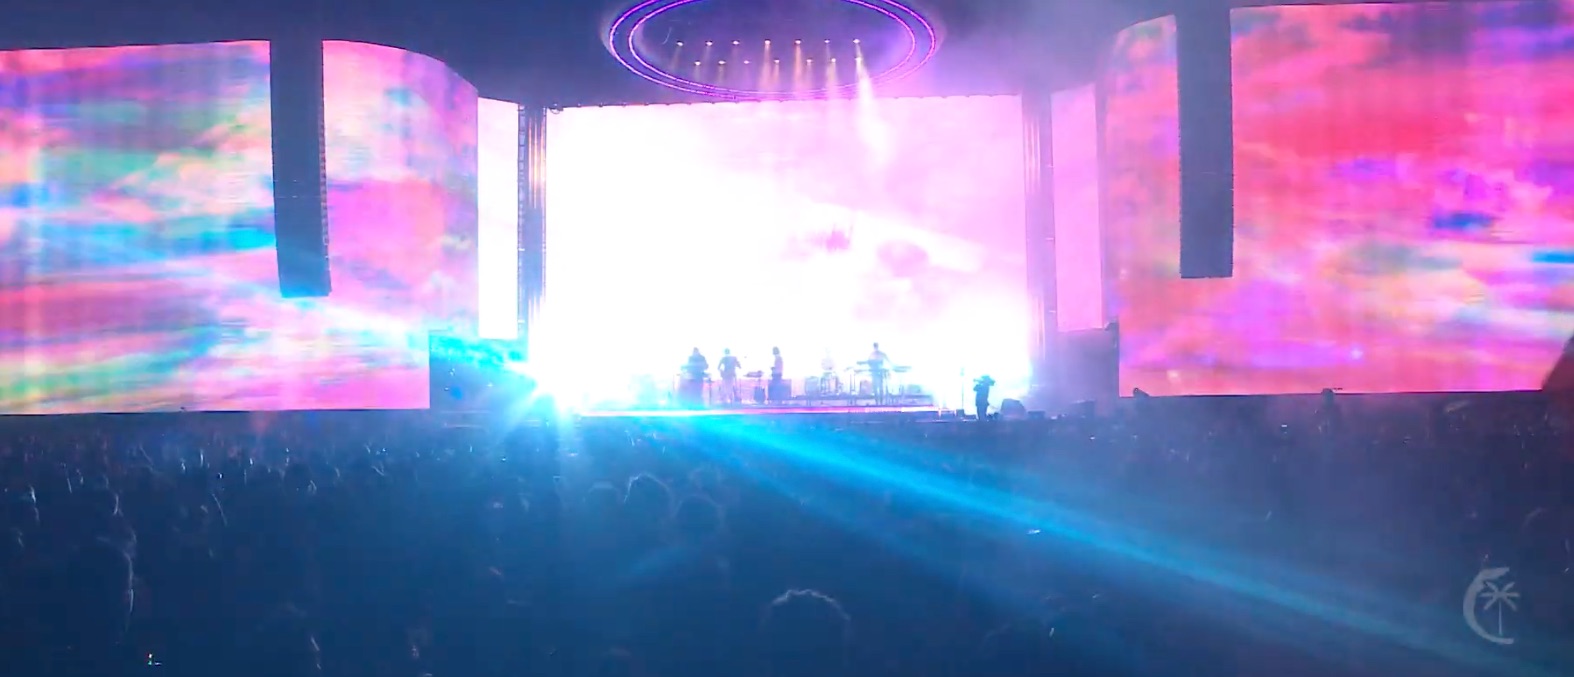 tame impala played coachella with huge psychedelic graphics 2